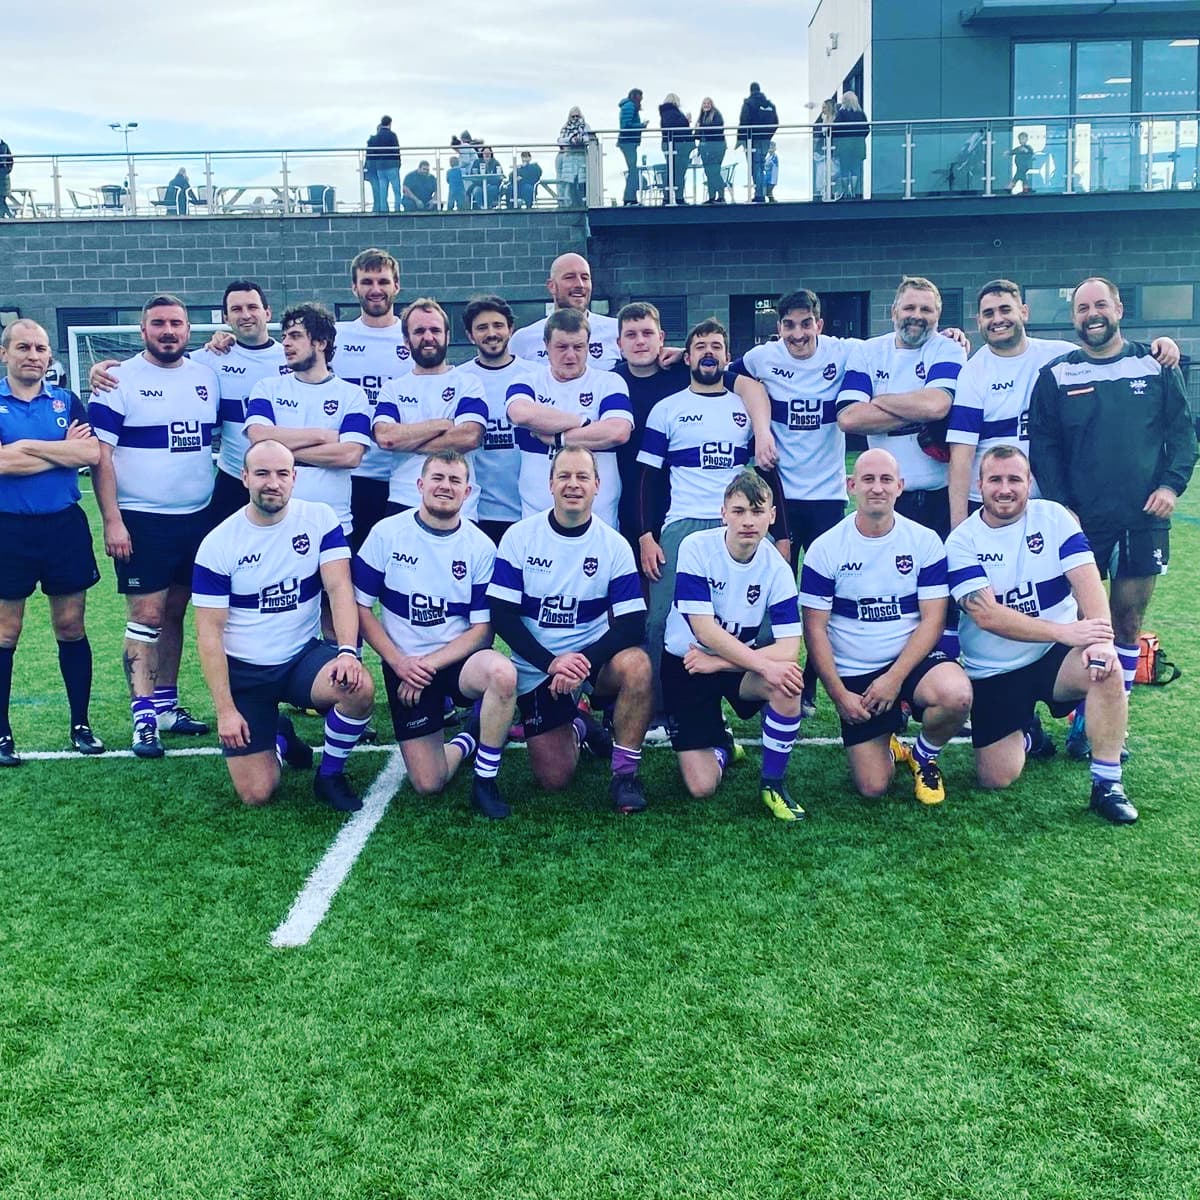 A great weekend for the Purple and White. Two home wins followed by a buzzing Halloween Social. A huge thank you to all the old boys that came along - a pleasure to have you there cheering us on. Onto the next! #UpTheAsh #MoreThanARugbyClub